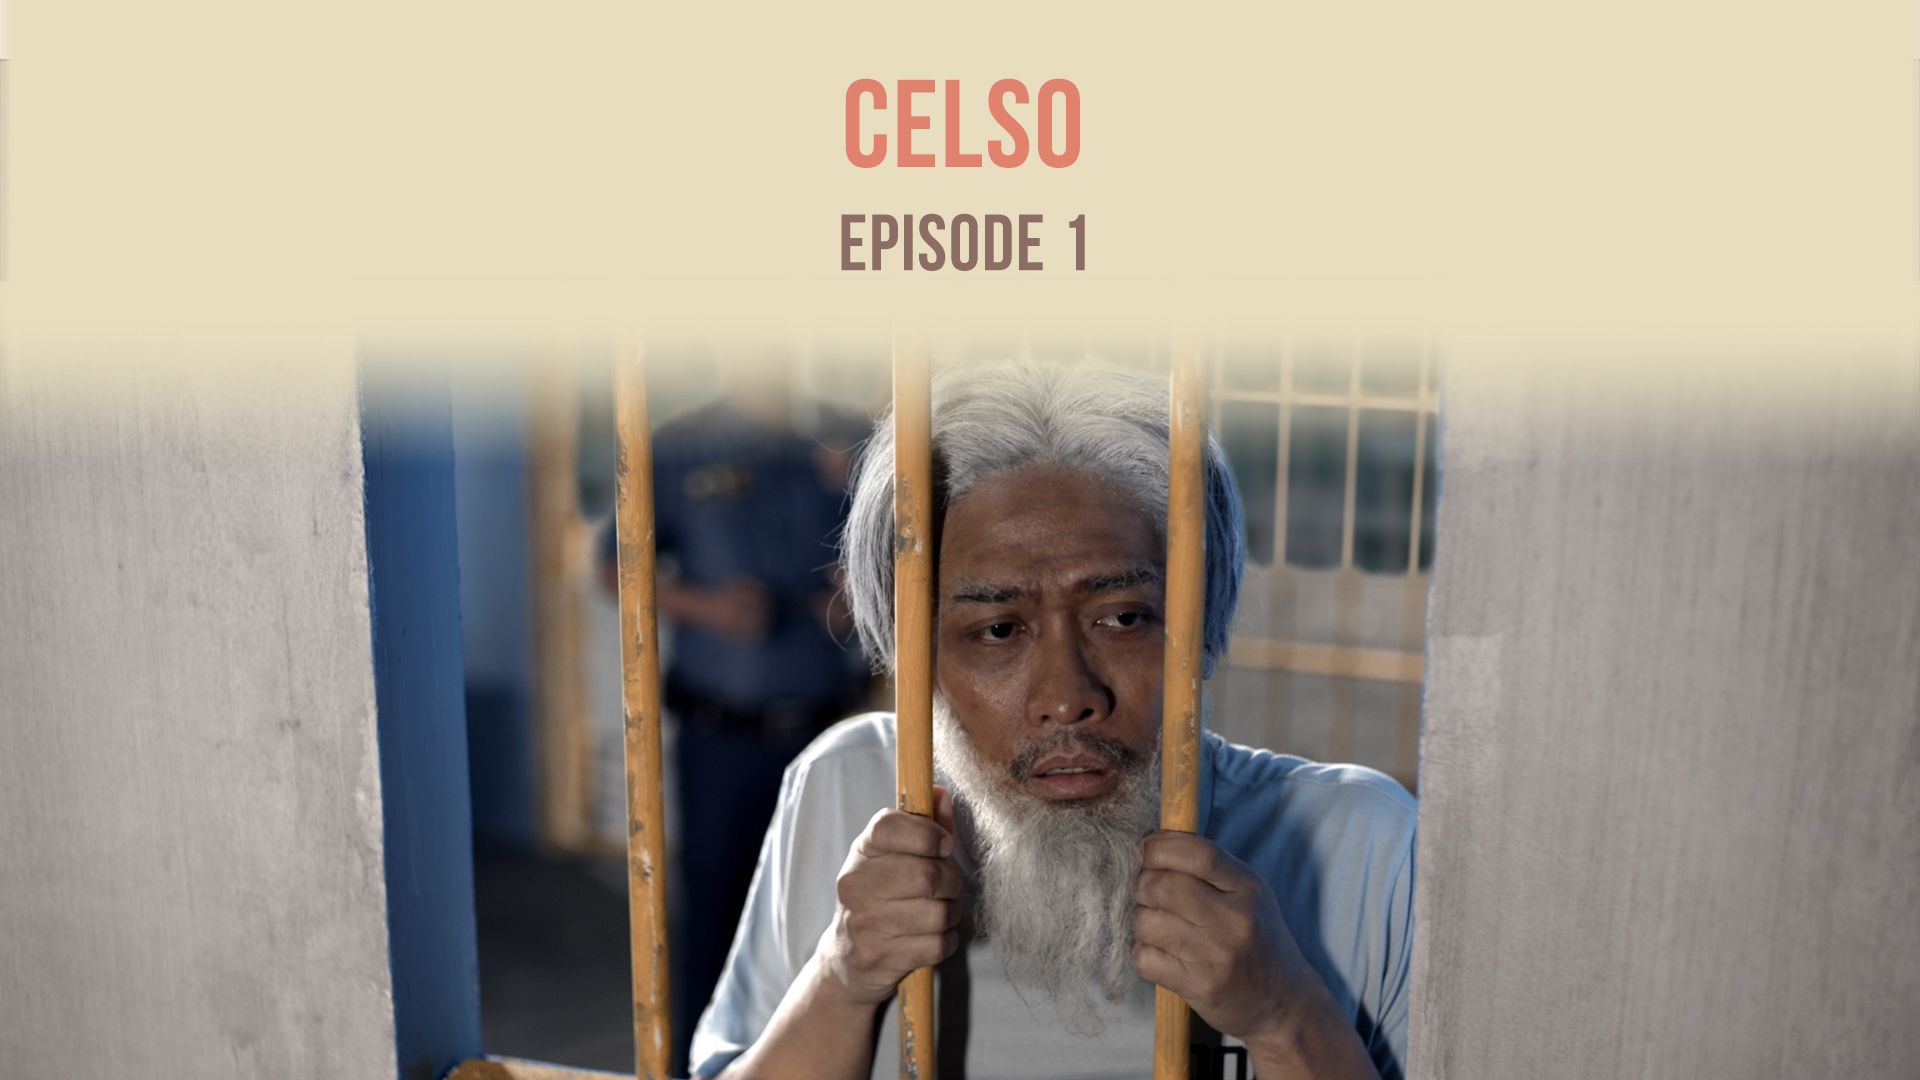 CELSO Episode 1